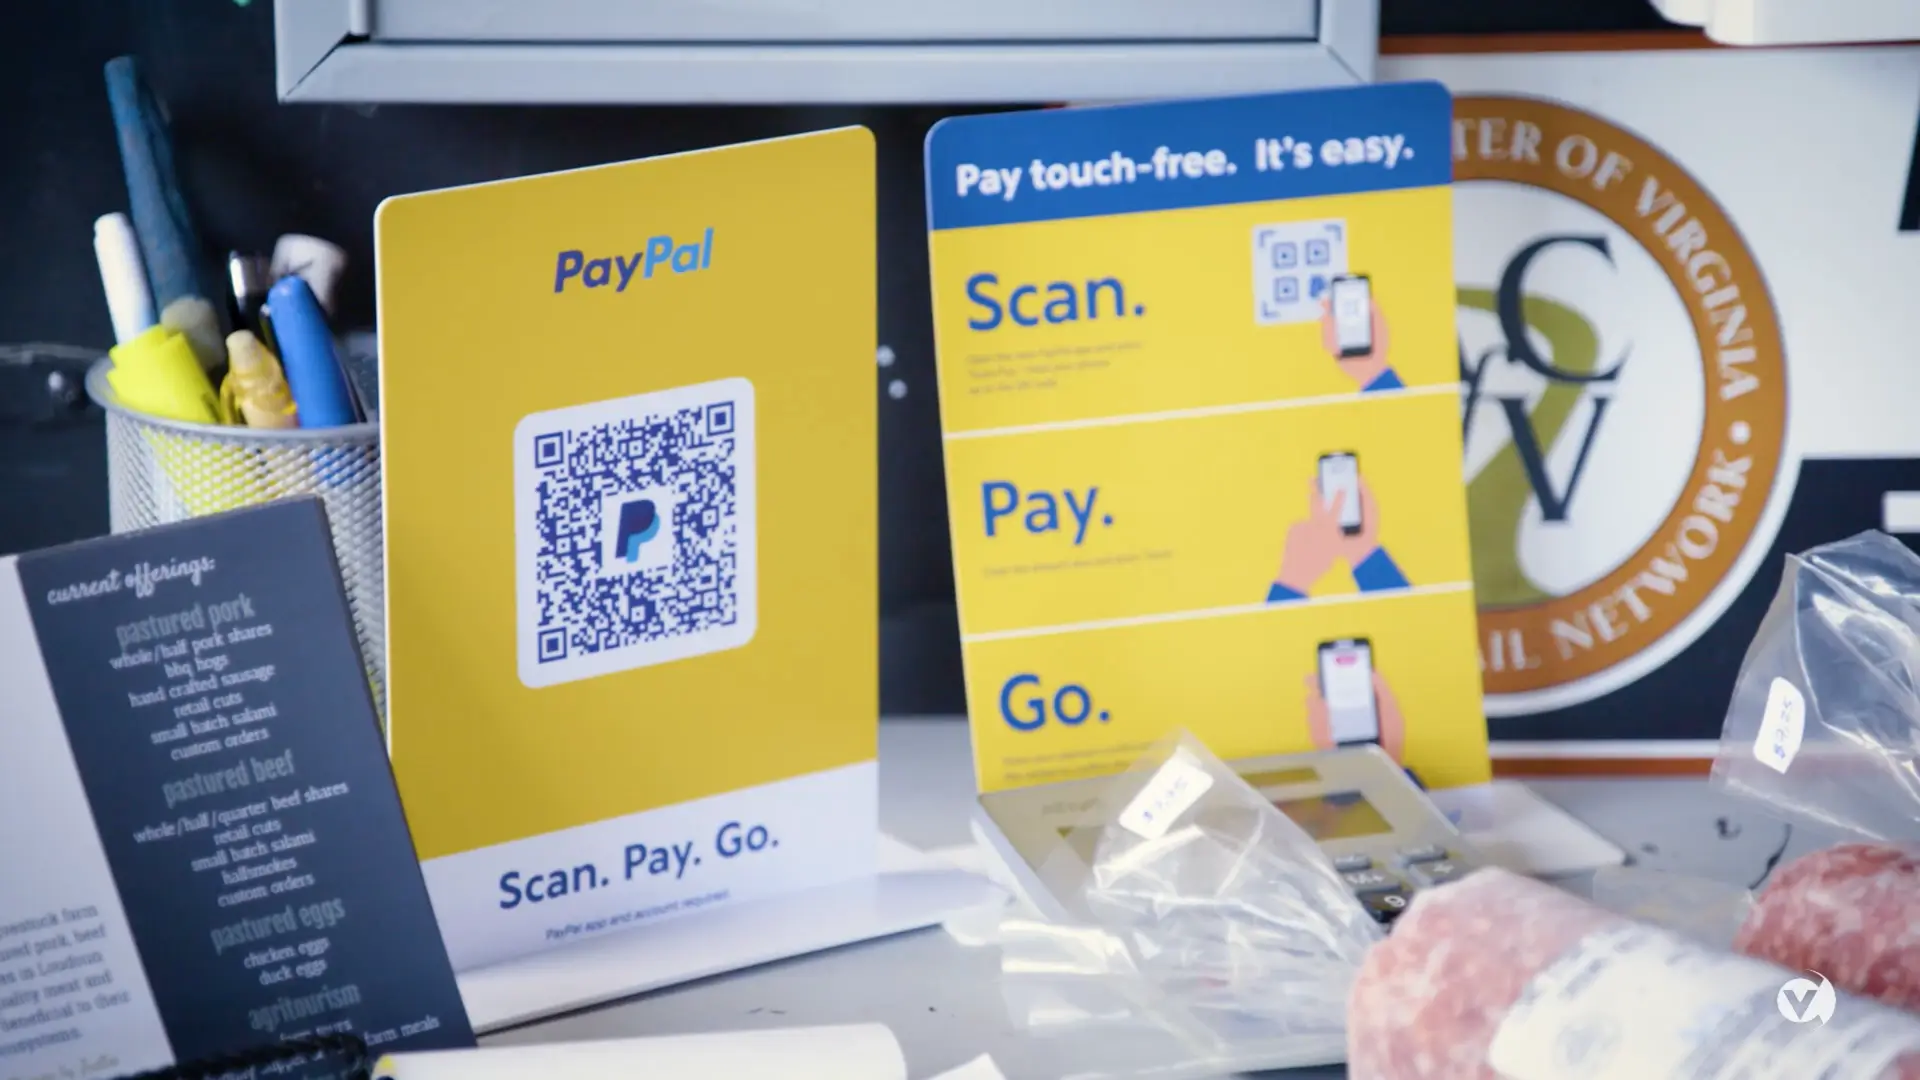 A desk with a PayPal qr code sign for online payments and other items.